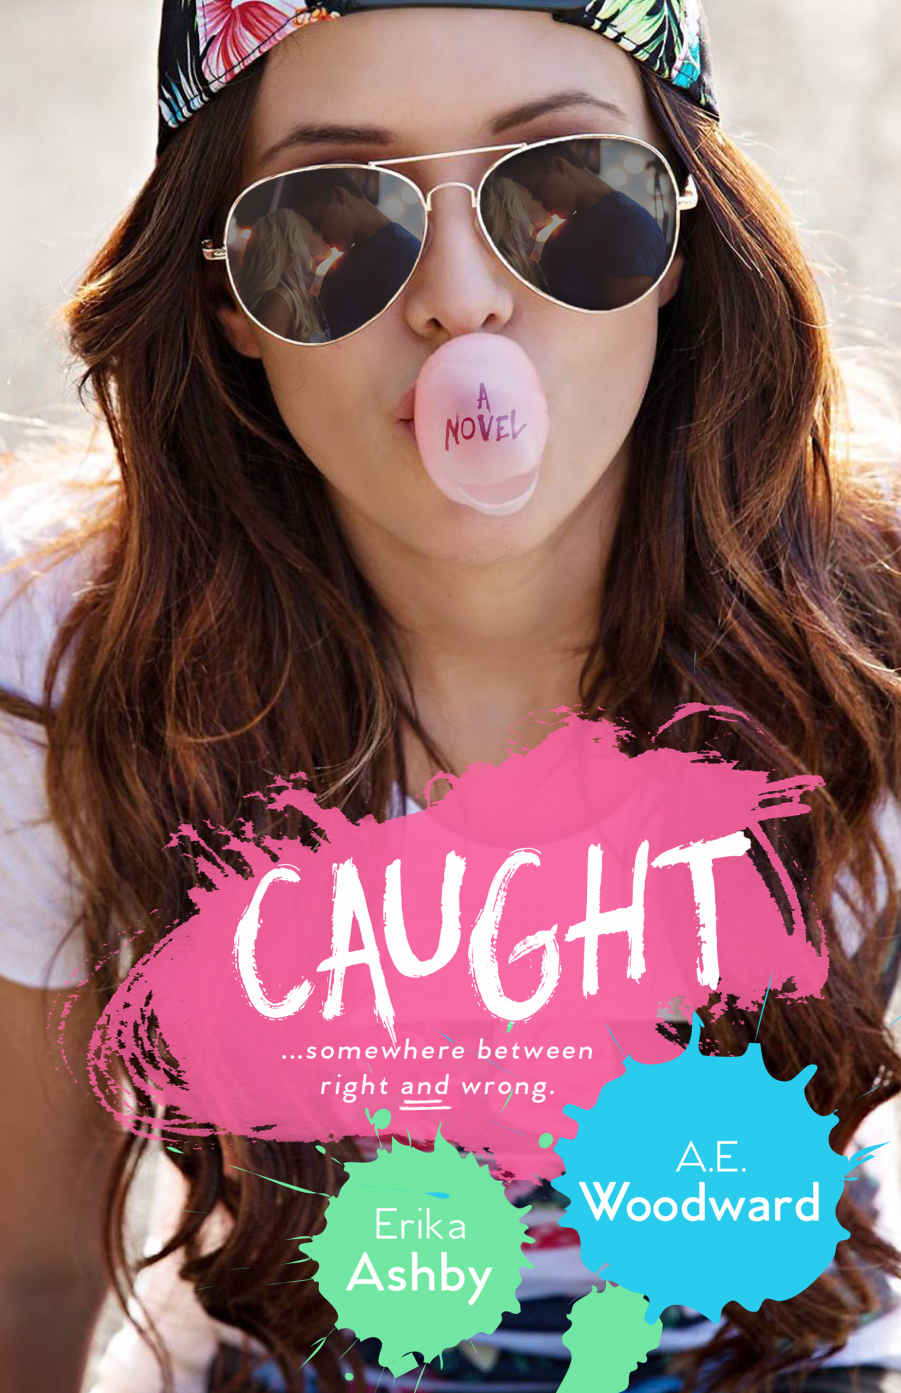 Caught by Erika Ashby